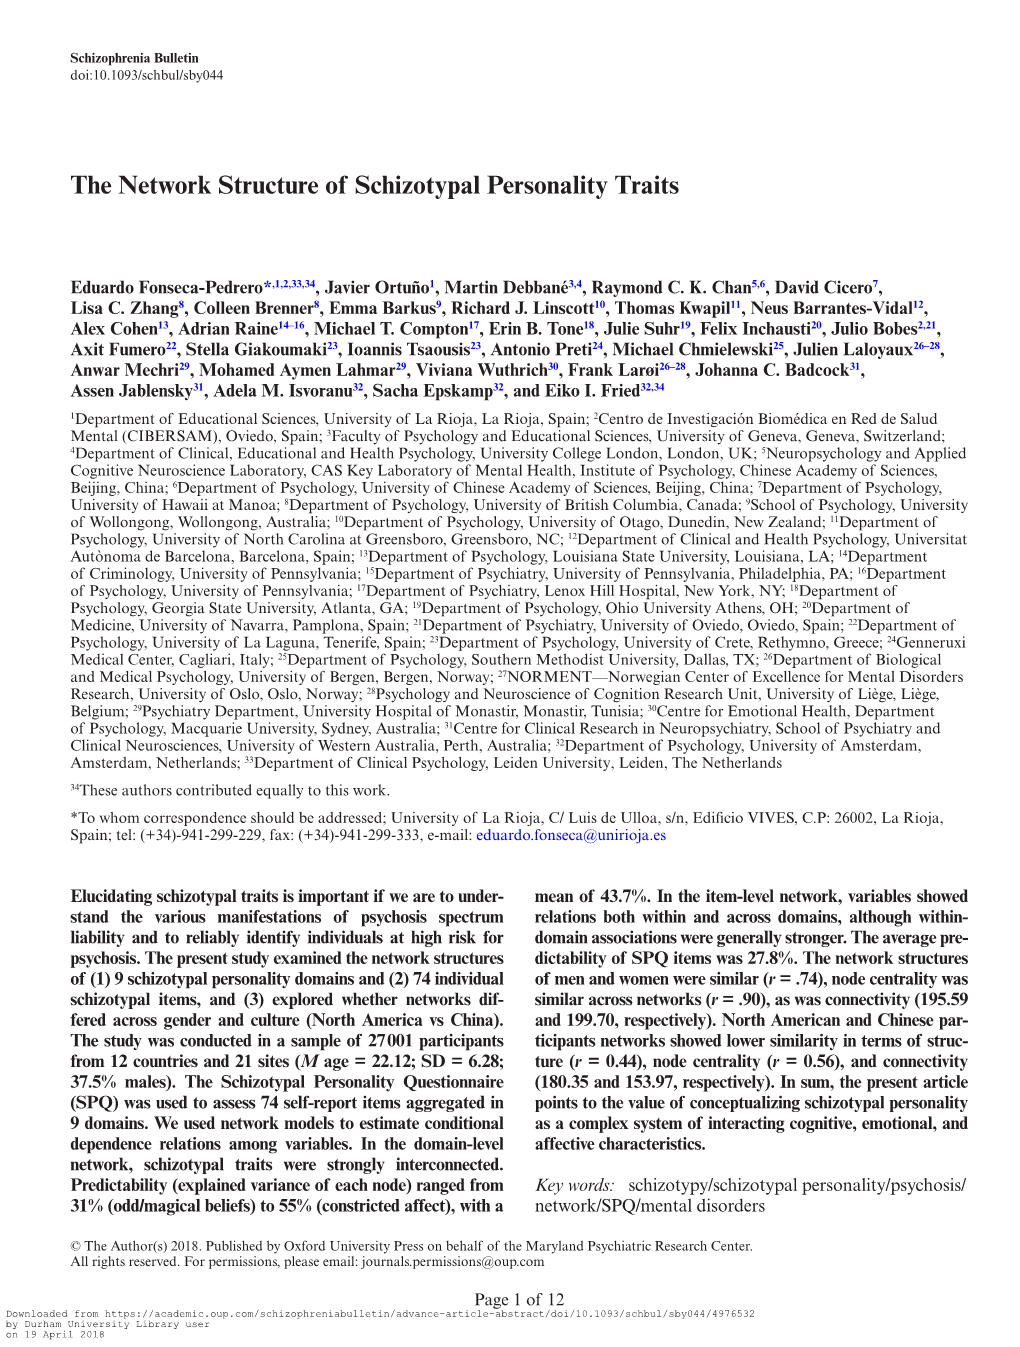 The Network Structure of Schizotypal Personality Traits